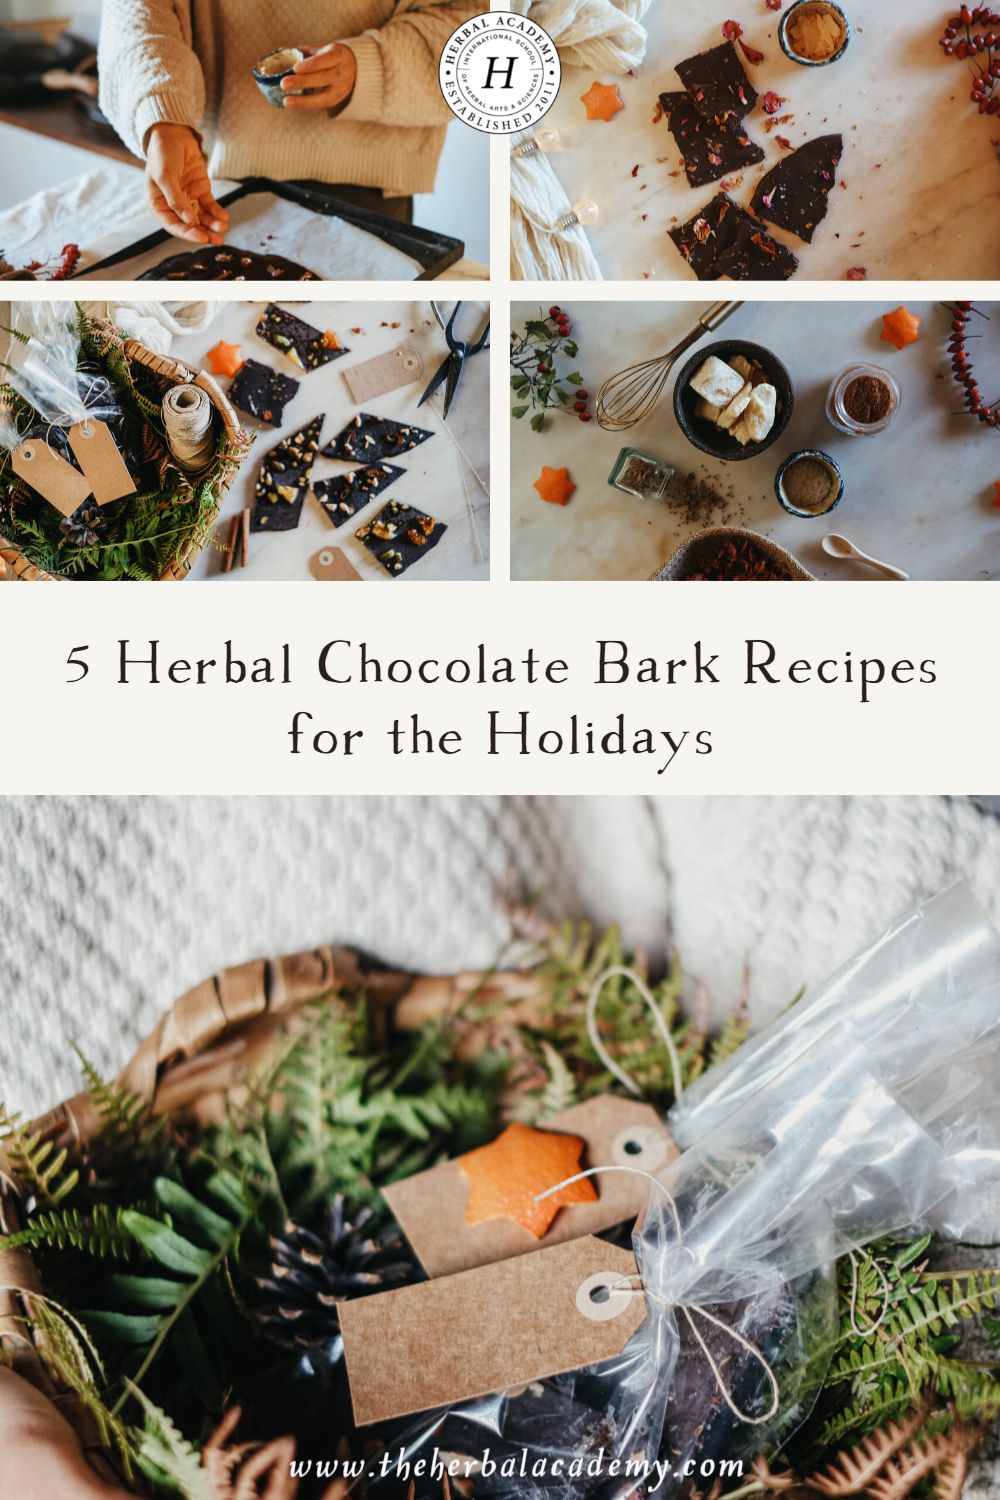 5 Herbal Chocolate Bark Recipes for the Holidays | Herbal Academy | These homemade chocolate bark recipes are delectable treats you can make and keep on hand to give throughout the holiday season.